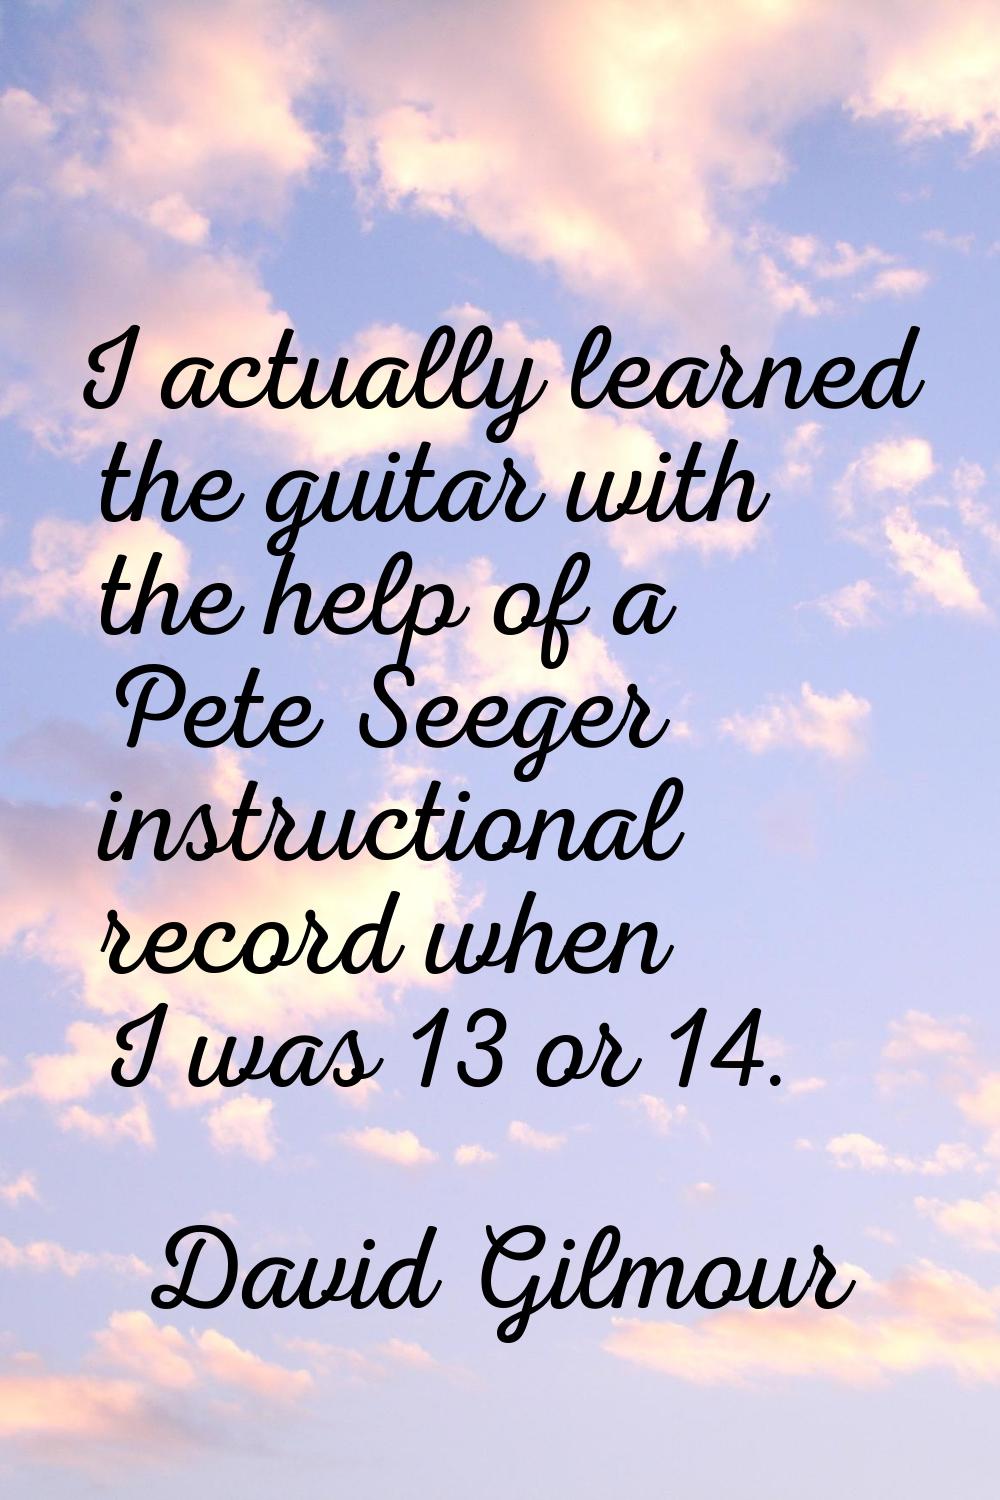 I actually learned the guitar with the help of a Pete Seeger instructional record when I was 13 or 